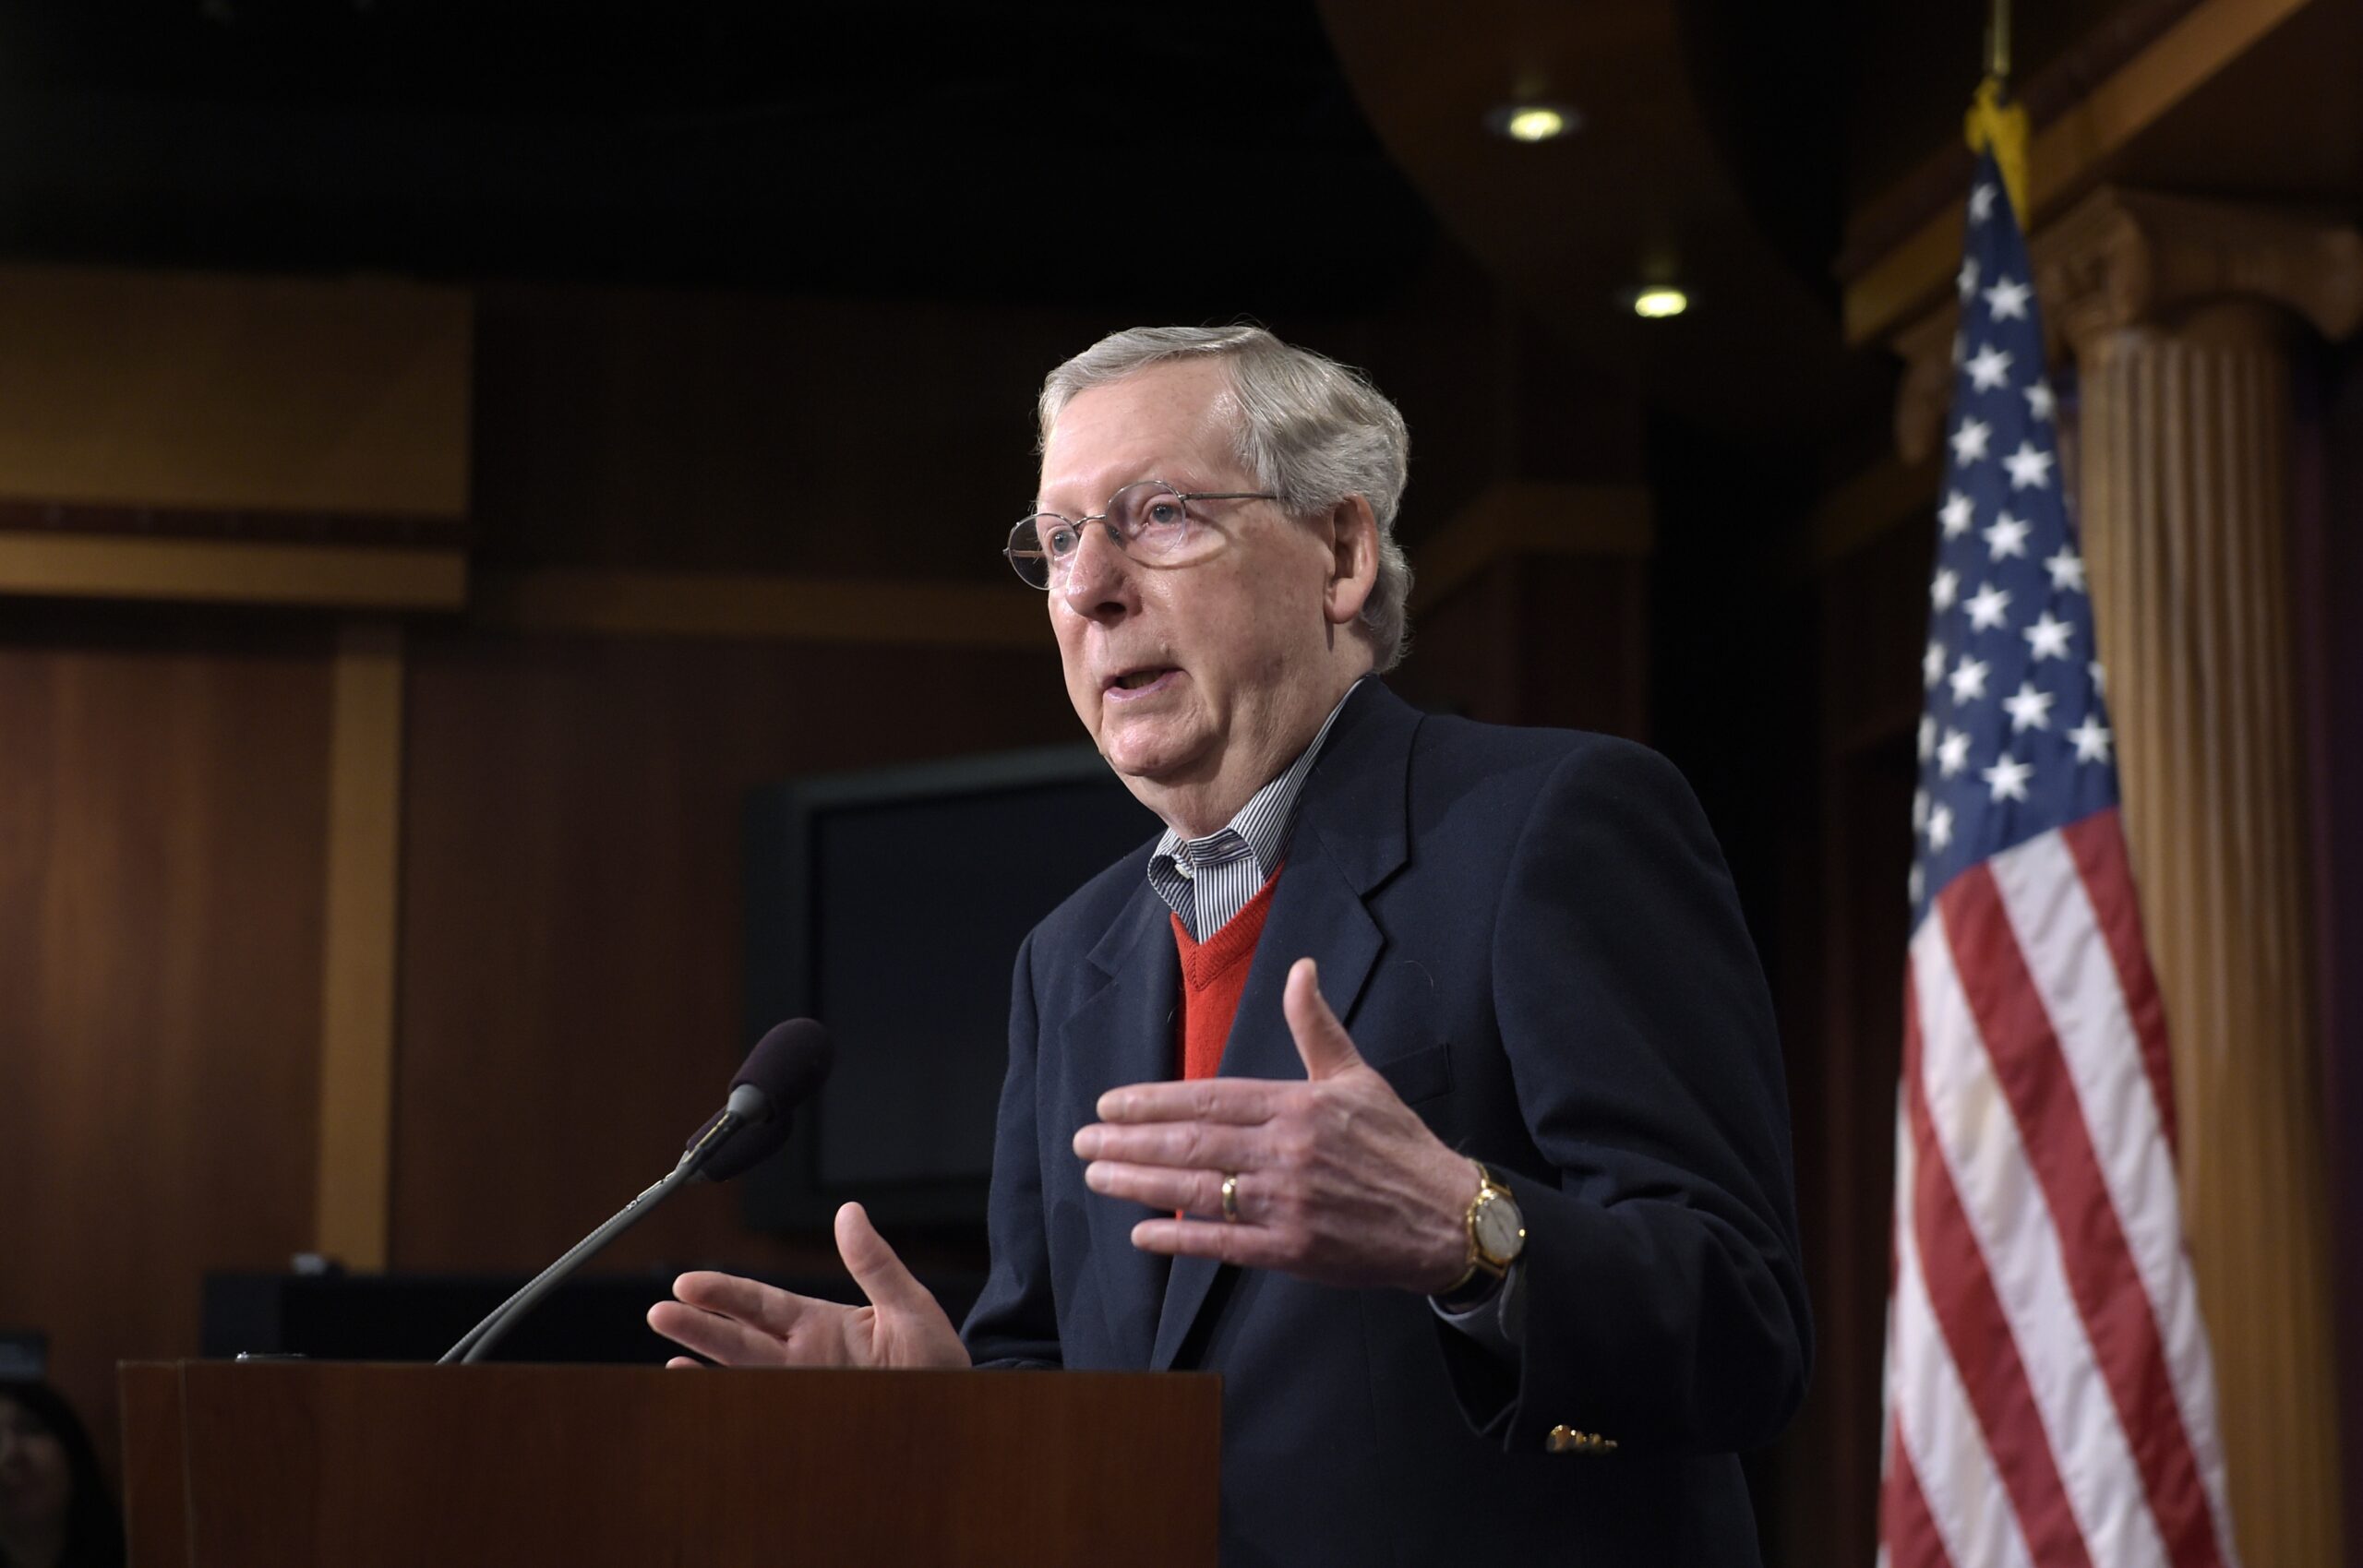 Mitch McConnell speaks at a news conference